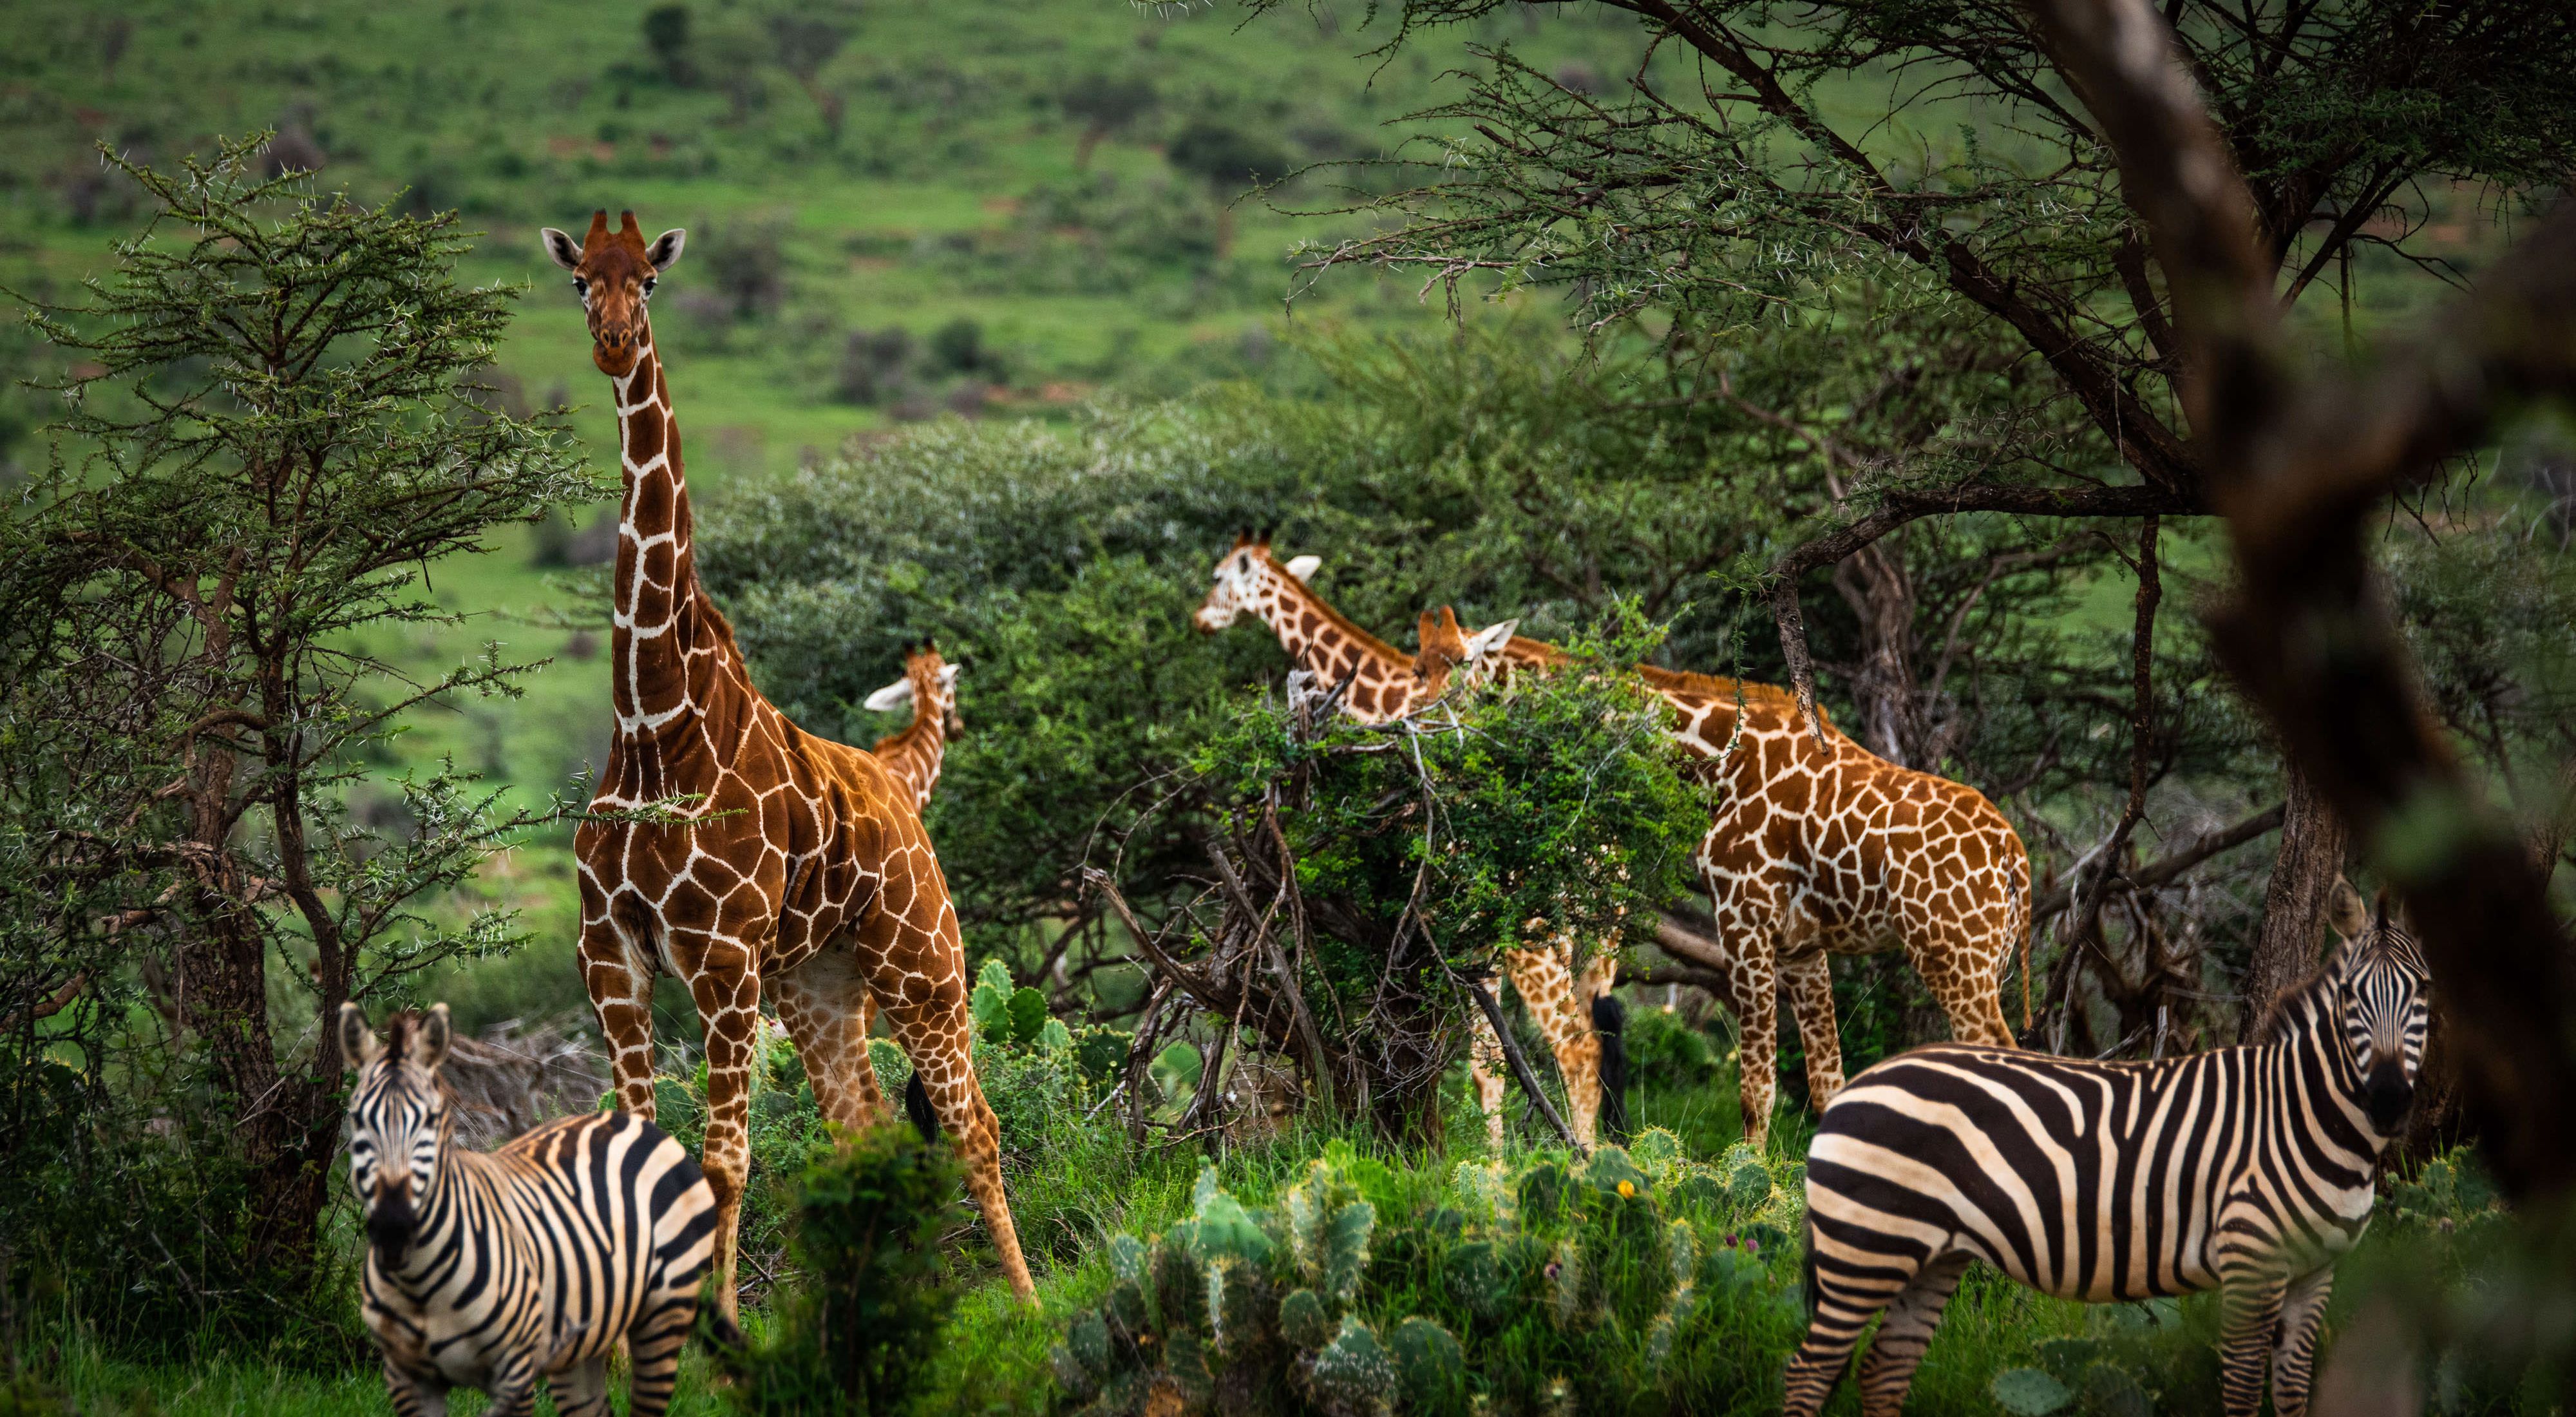 a group of zebras and giraffes graze in a lush green landscape